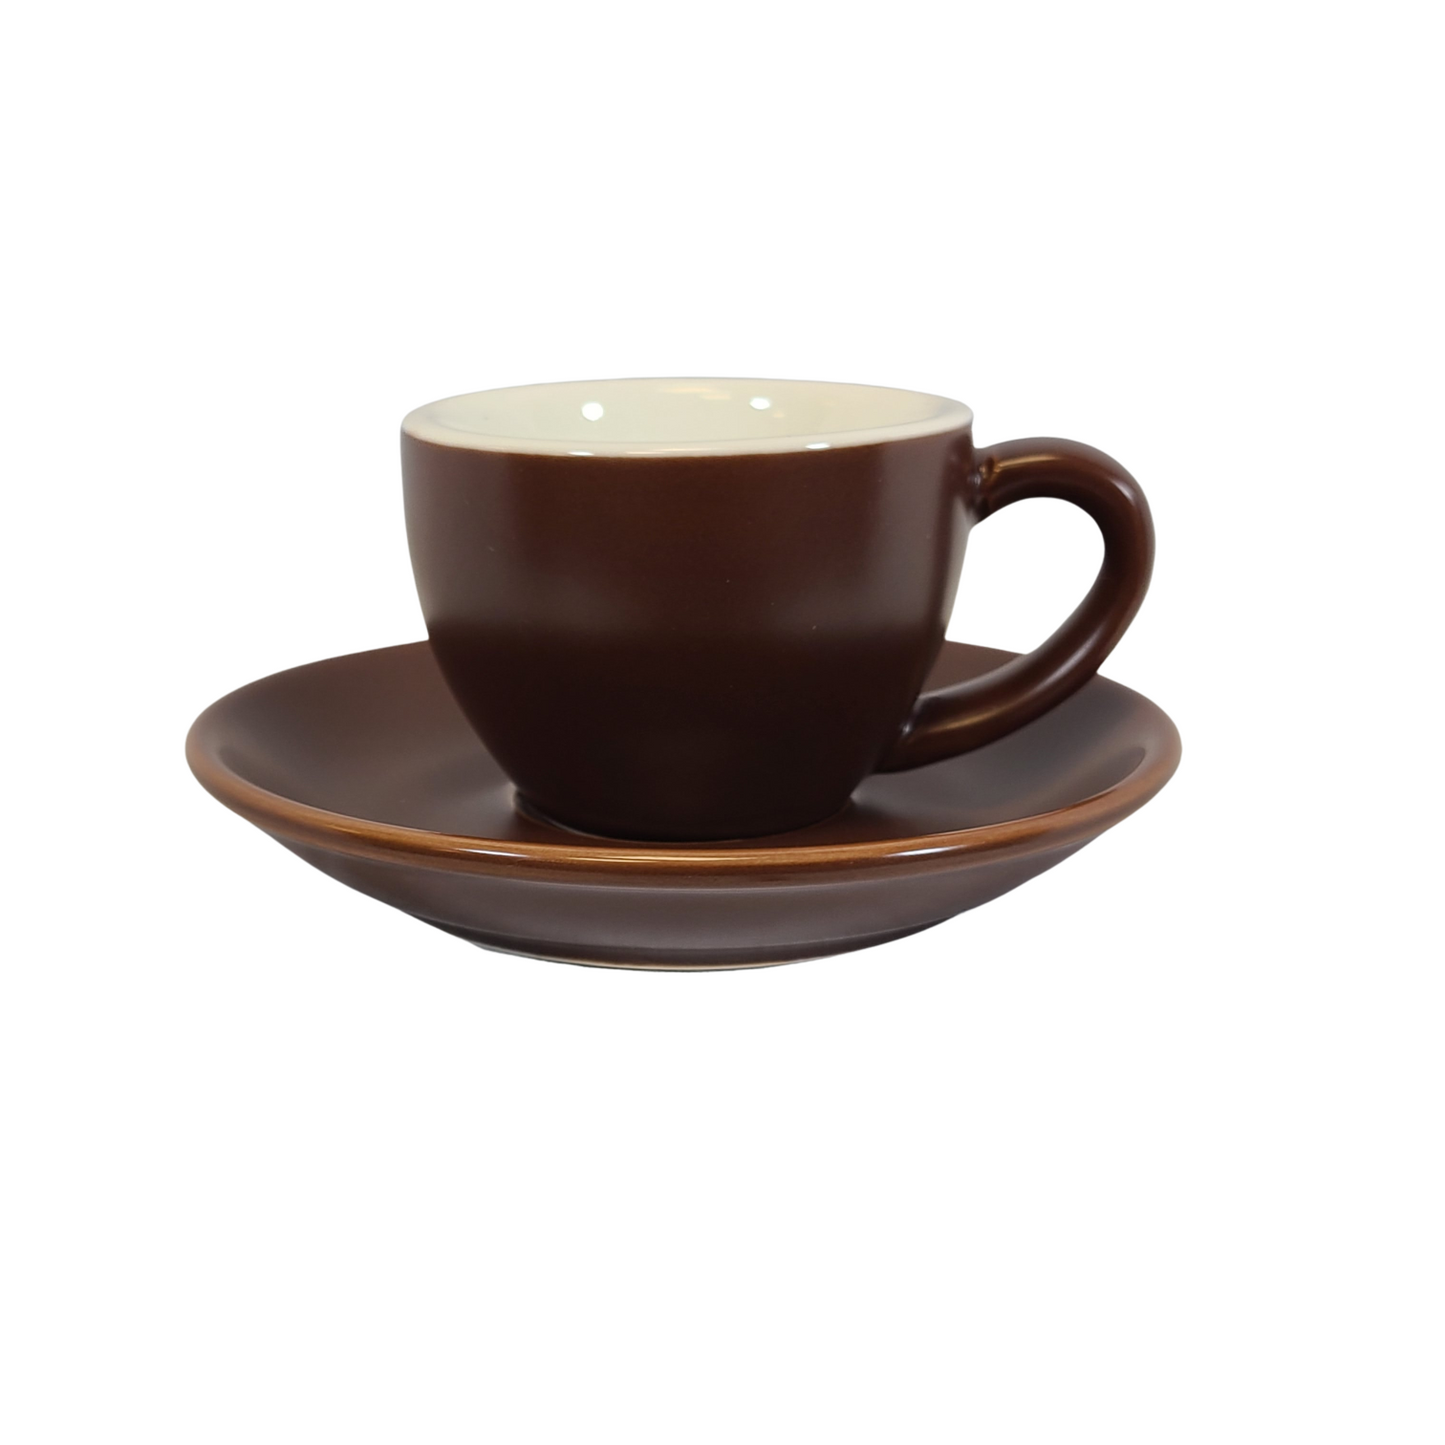 Coffee Addicts commercial ceramic cup with saucer in matte brown espresso cup 2.7oz 80ml